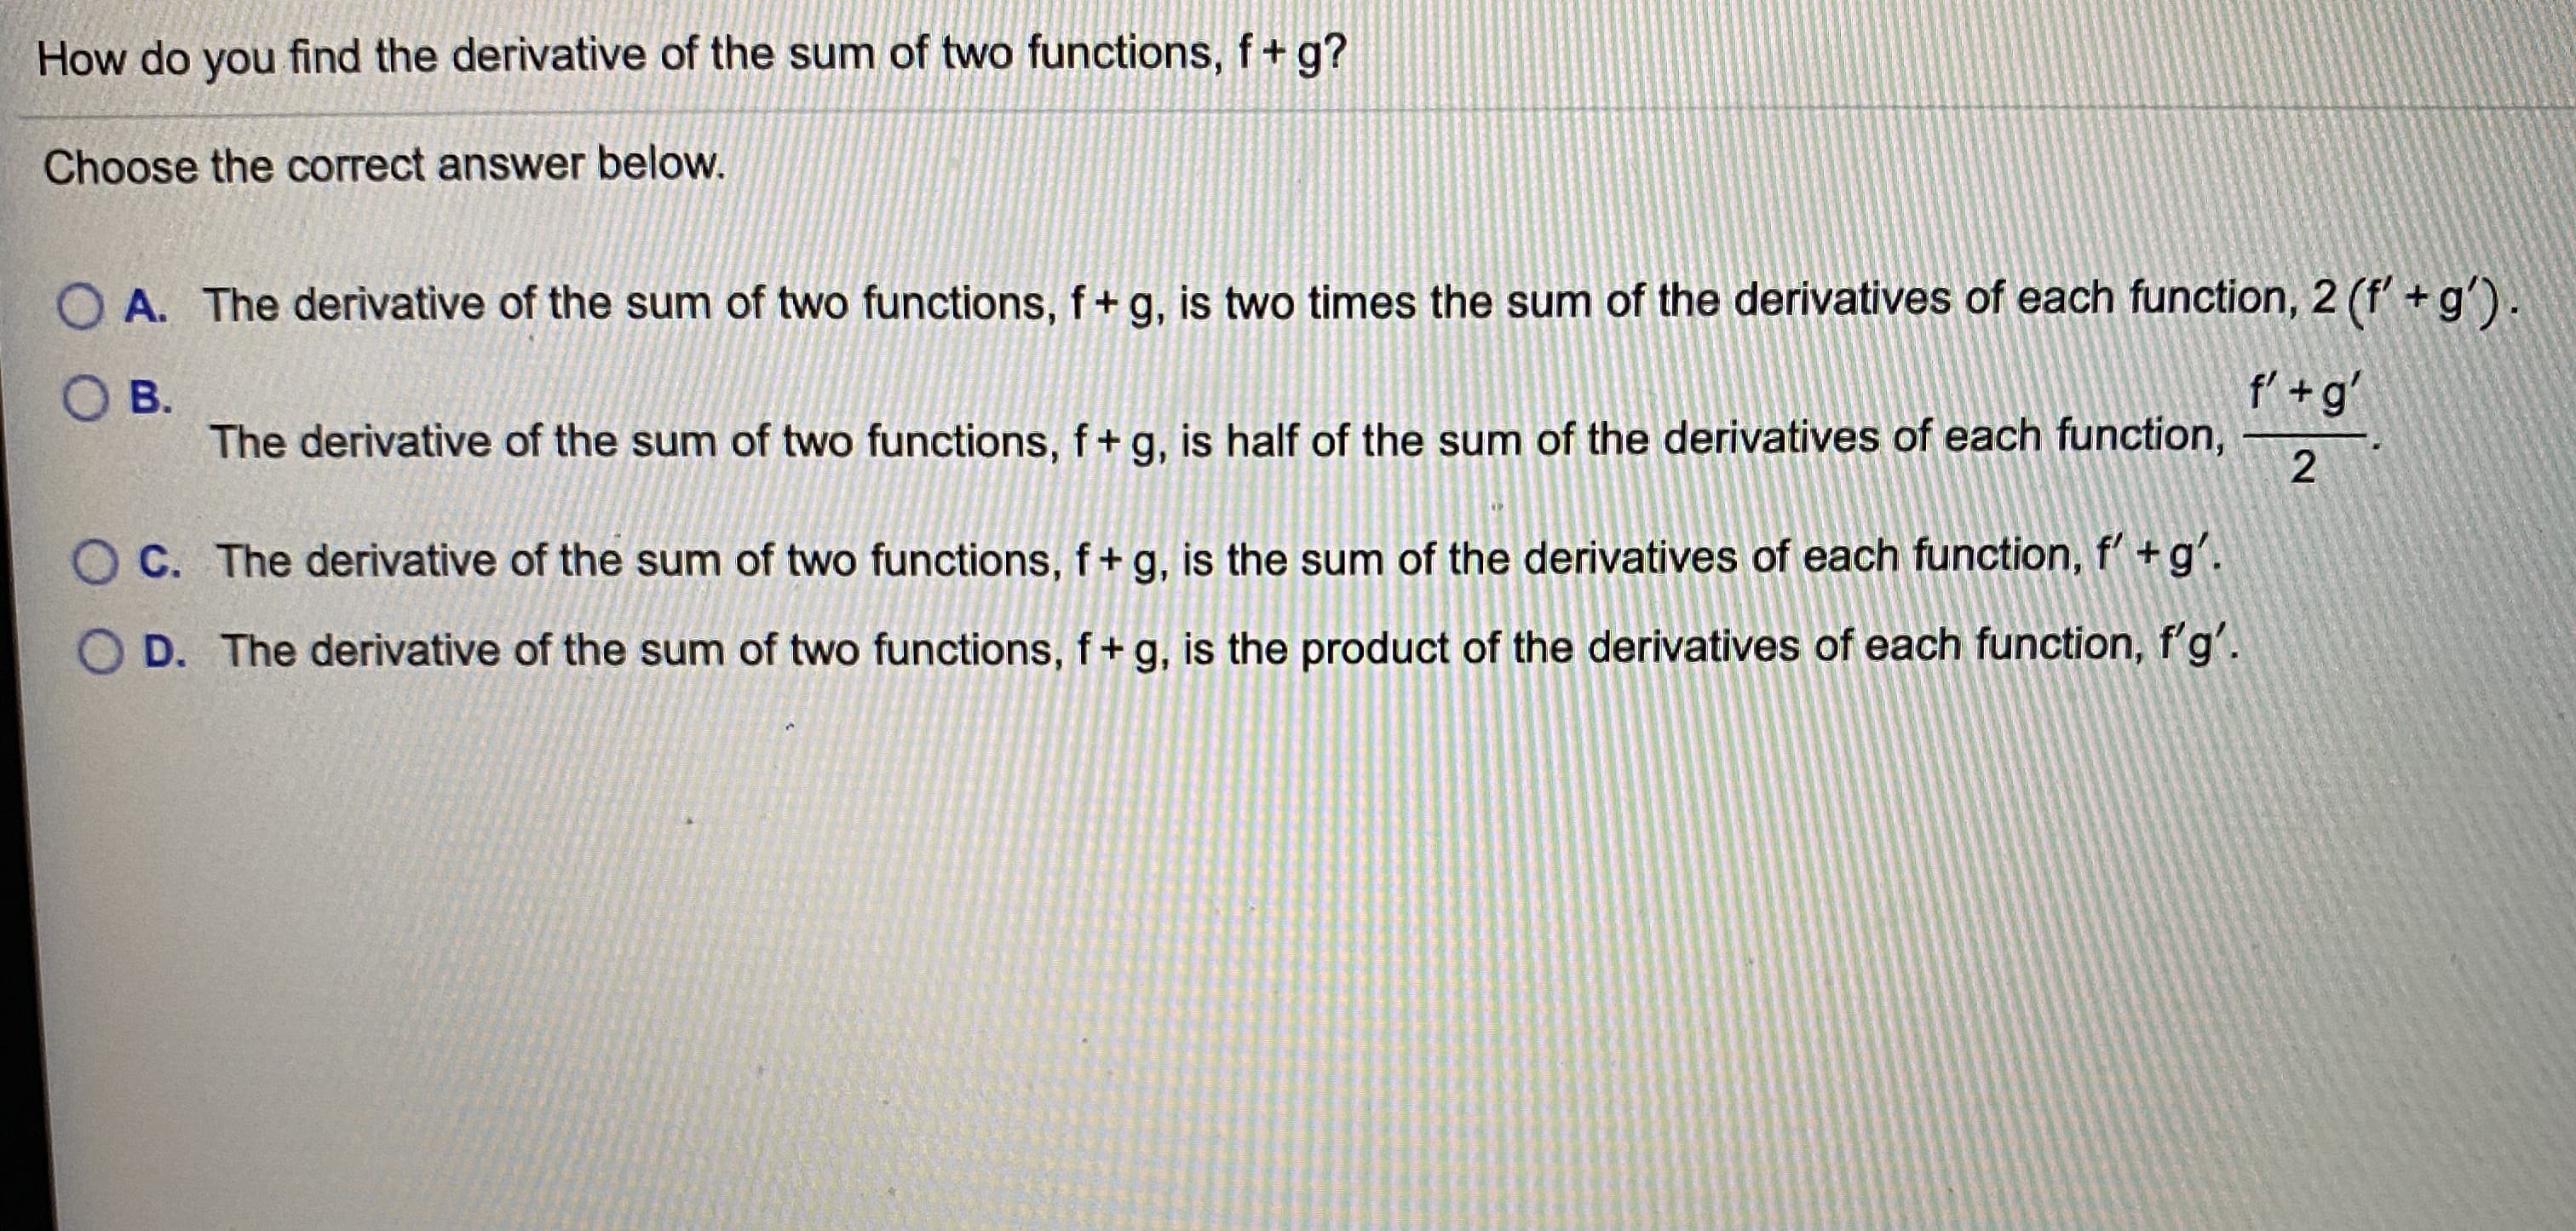 How do you find the derivative of the sum of two functions, f+ g?
Choose the correct answer below.
O A. The derivative of the sum of two functions, f+g, is two times the sum of the derivatives of each function, 2 (f' + g').
O B.
The derivative of the sum of two functions, f+g, is half of the sum of the derivatives of each function,
f' +g'
C. The derivative of the sum of two functions, f+ g, is the sum of the derivatives of each function, f'+g'.
D. The derivative of the sum of two functions, f+ g, is the product of the derivatives of each function, f'g'.
2.
